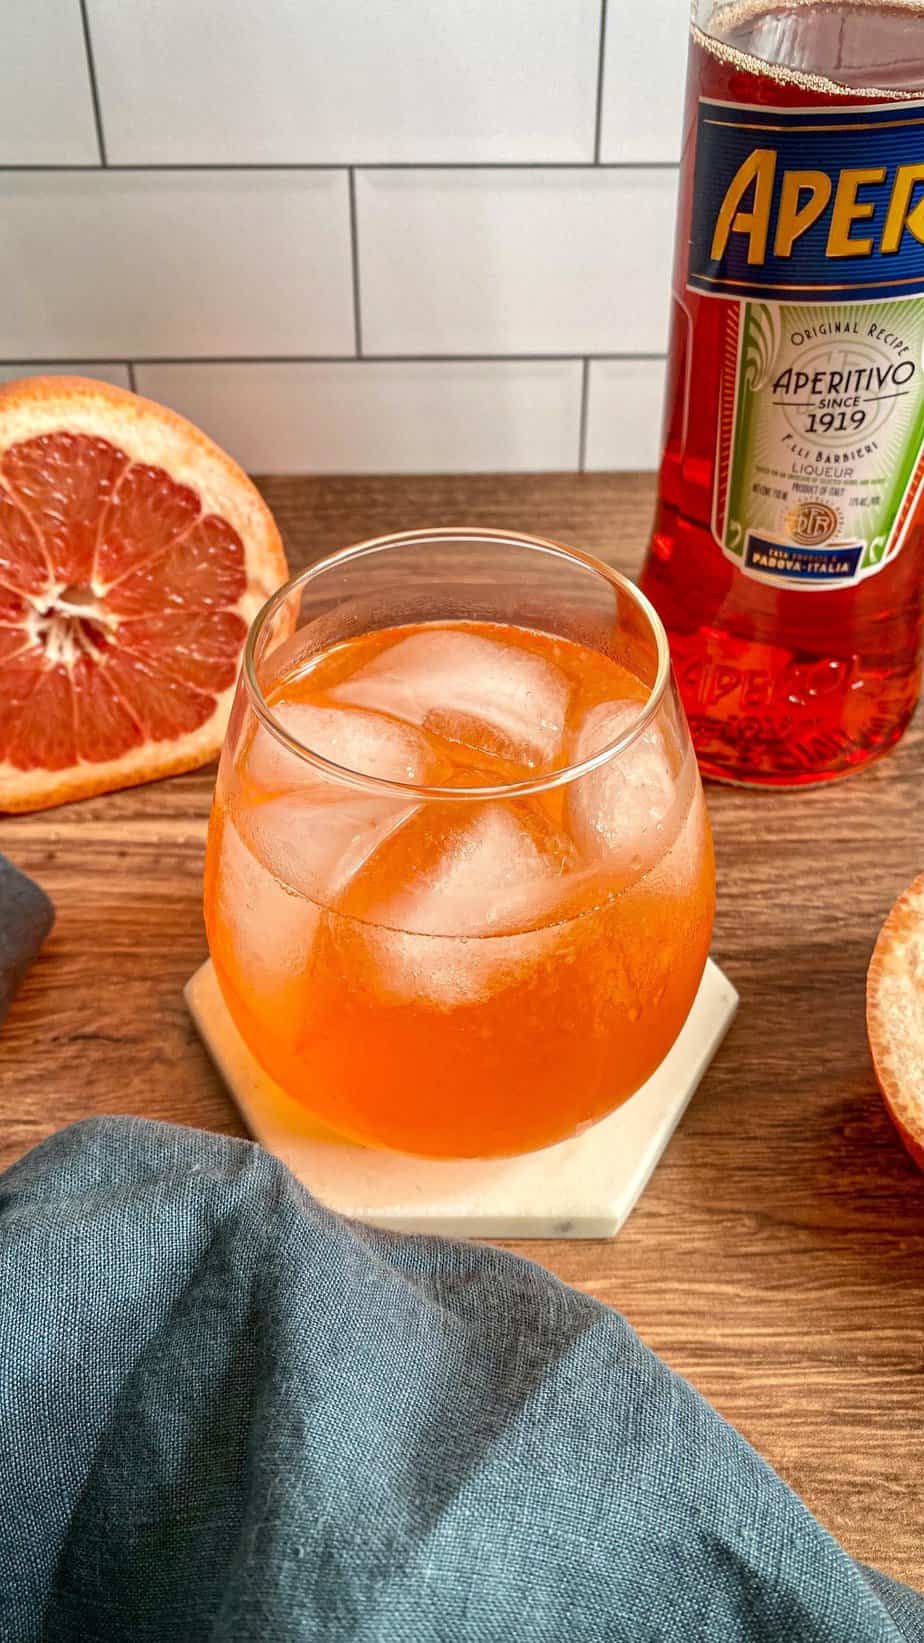 Transport yourself to a sun drenched, breezy patio on the coast of Italy with this Aperol Gin Cocktail.

🧡 FOLLOW @happyhoneykitchen 
🧡 FIND recipe in link in bio

#summercocktails #aperol #gin #gincocktails #grapefruit #drinkrecipes #cocktailrecipes #houstonfoodblogger